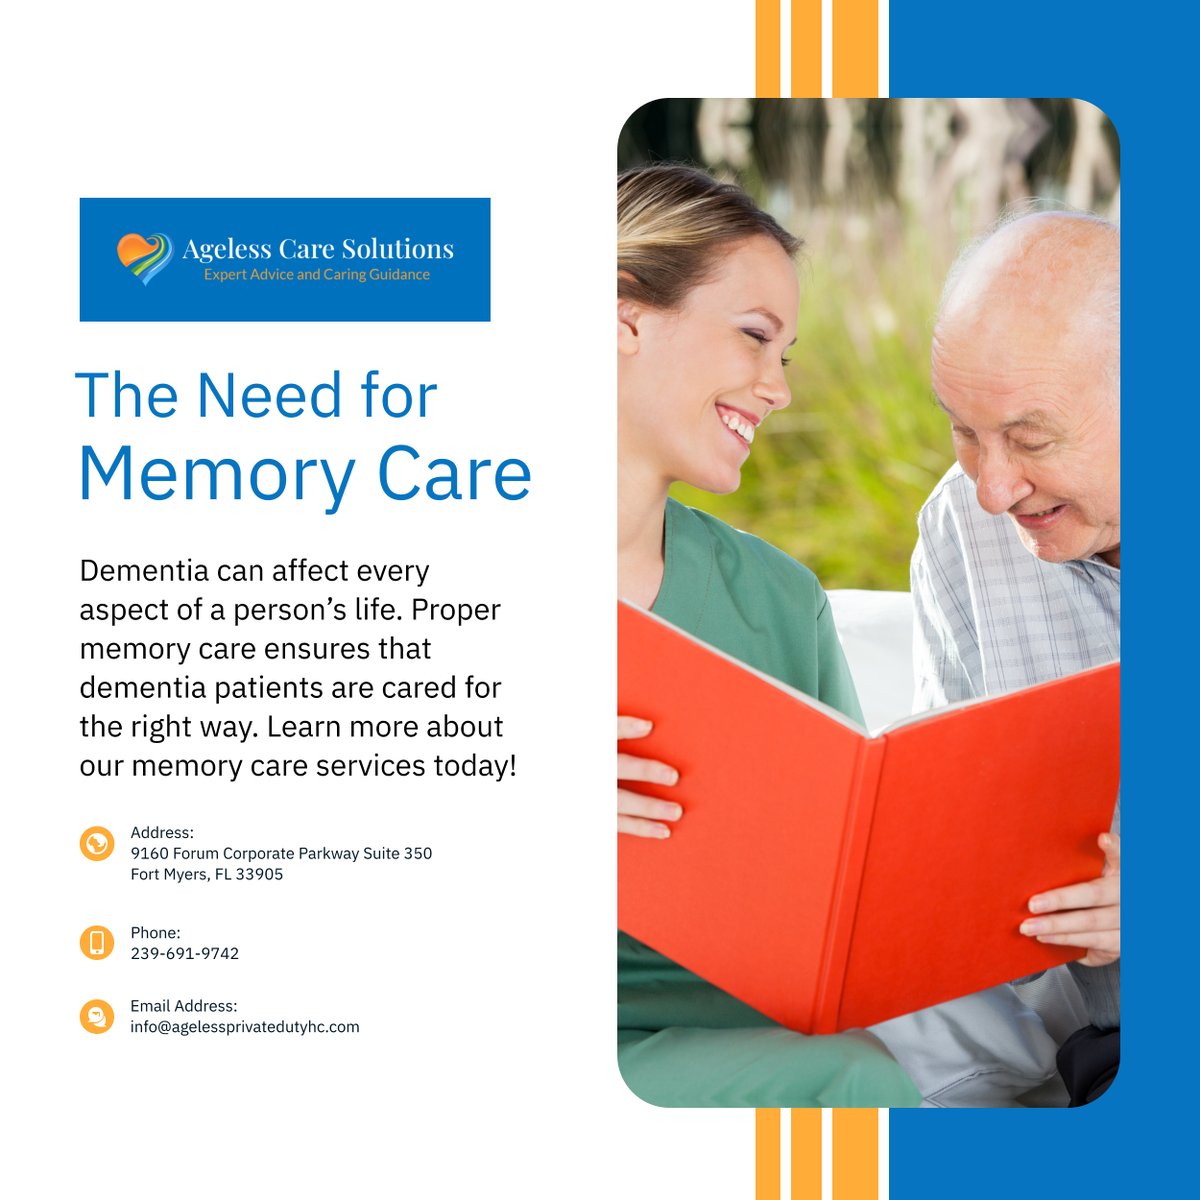 Taking care of individuals with dementia will require the right skills and resources from qualified professionals. We can make this happen through our memory care services.

#HomeCare #FortMyersFL #MemoryCareServices #Dementia #QualifiedProfessionals